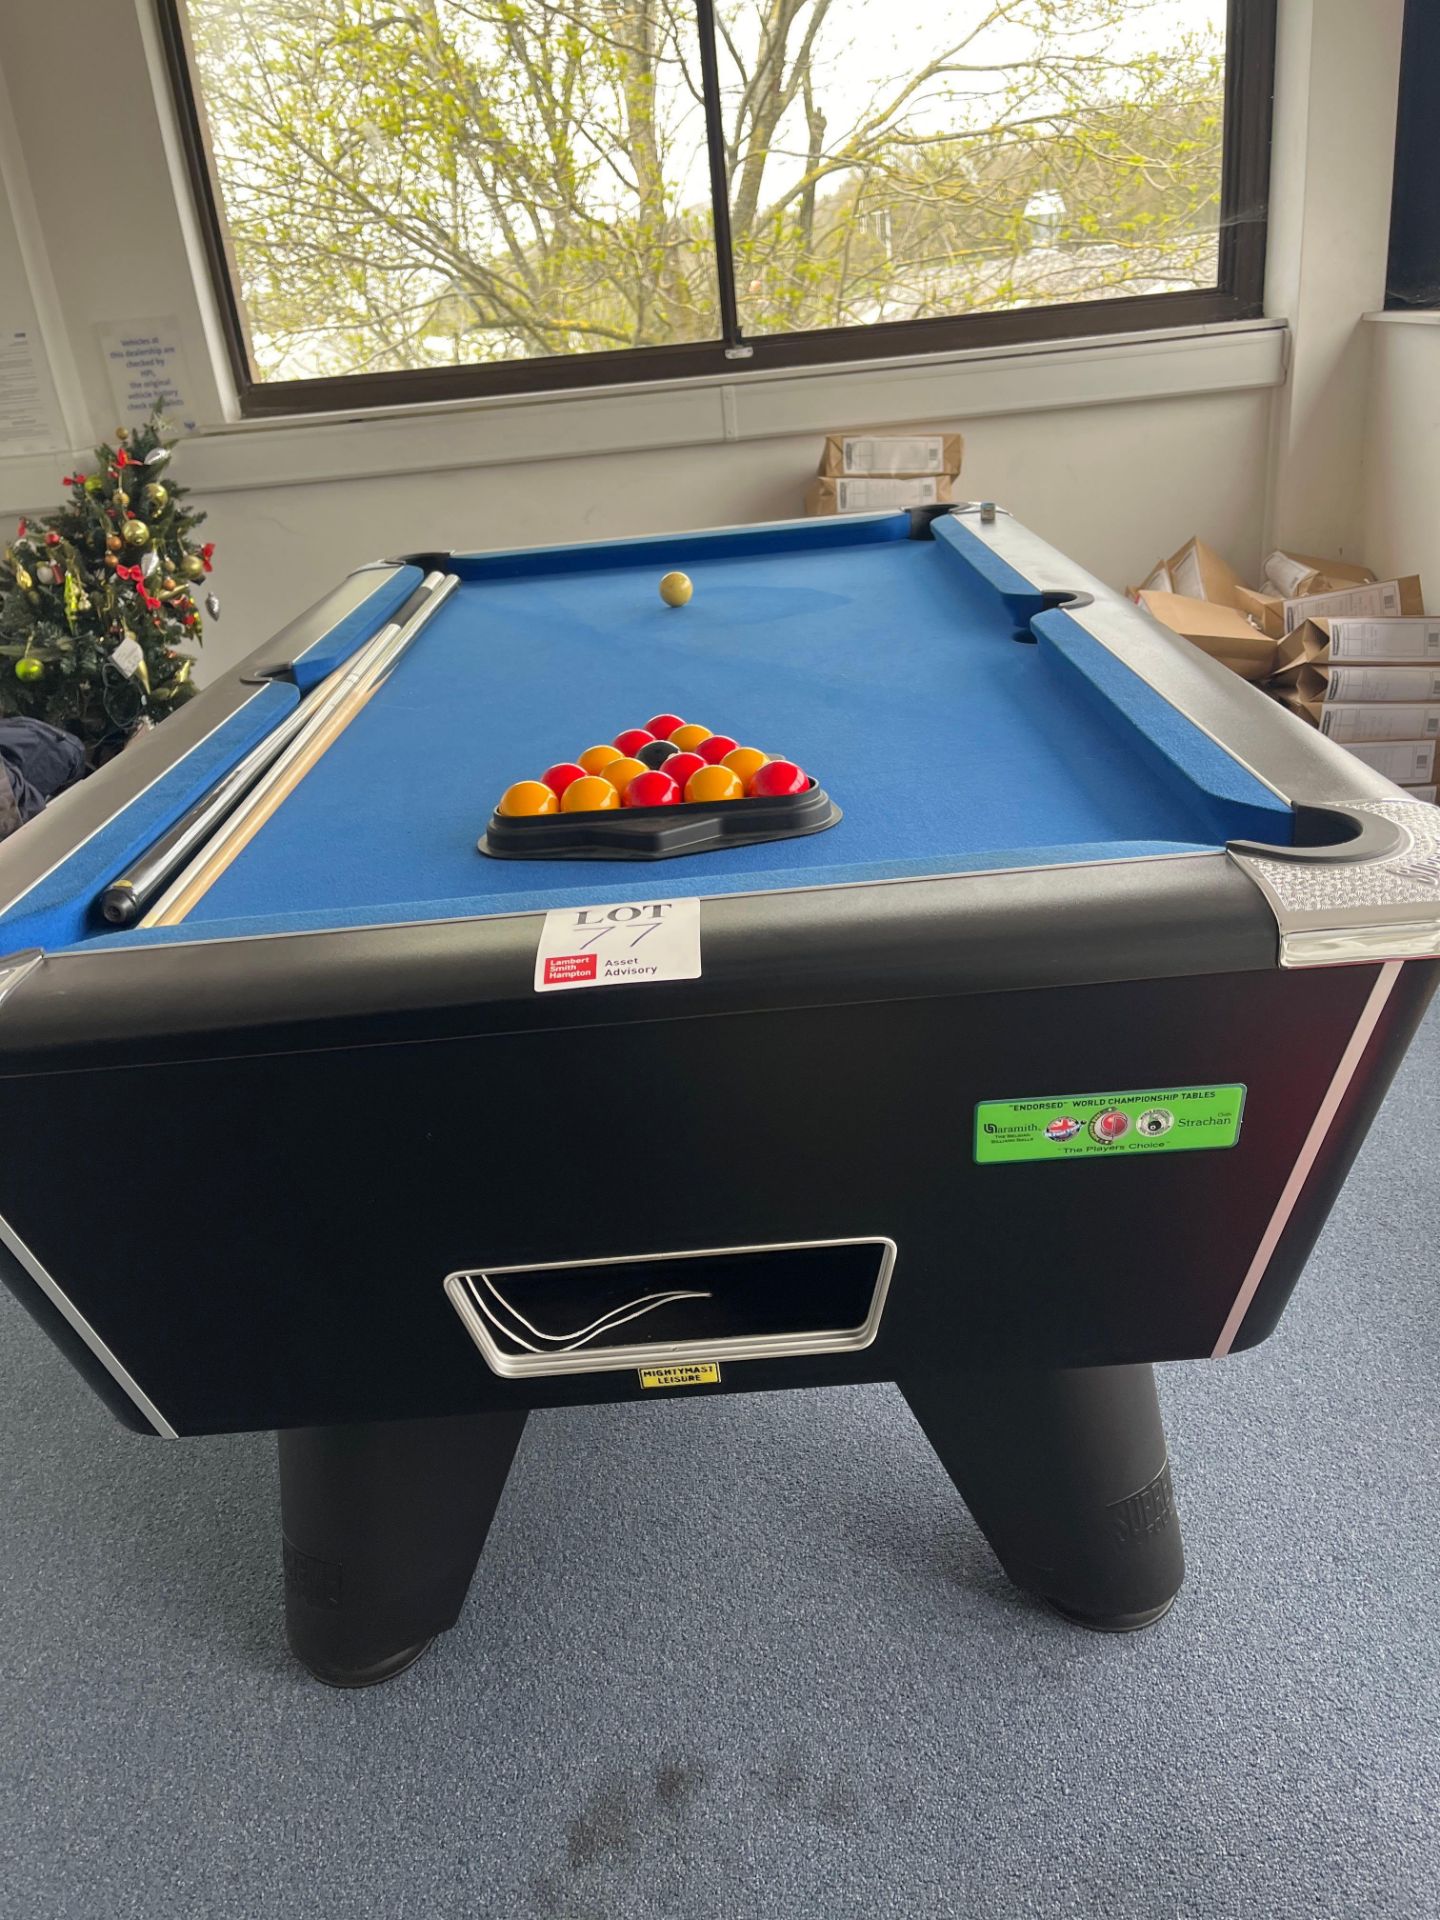 Pool Table - Image 6 of 6